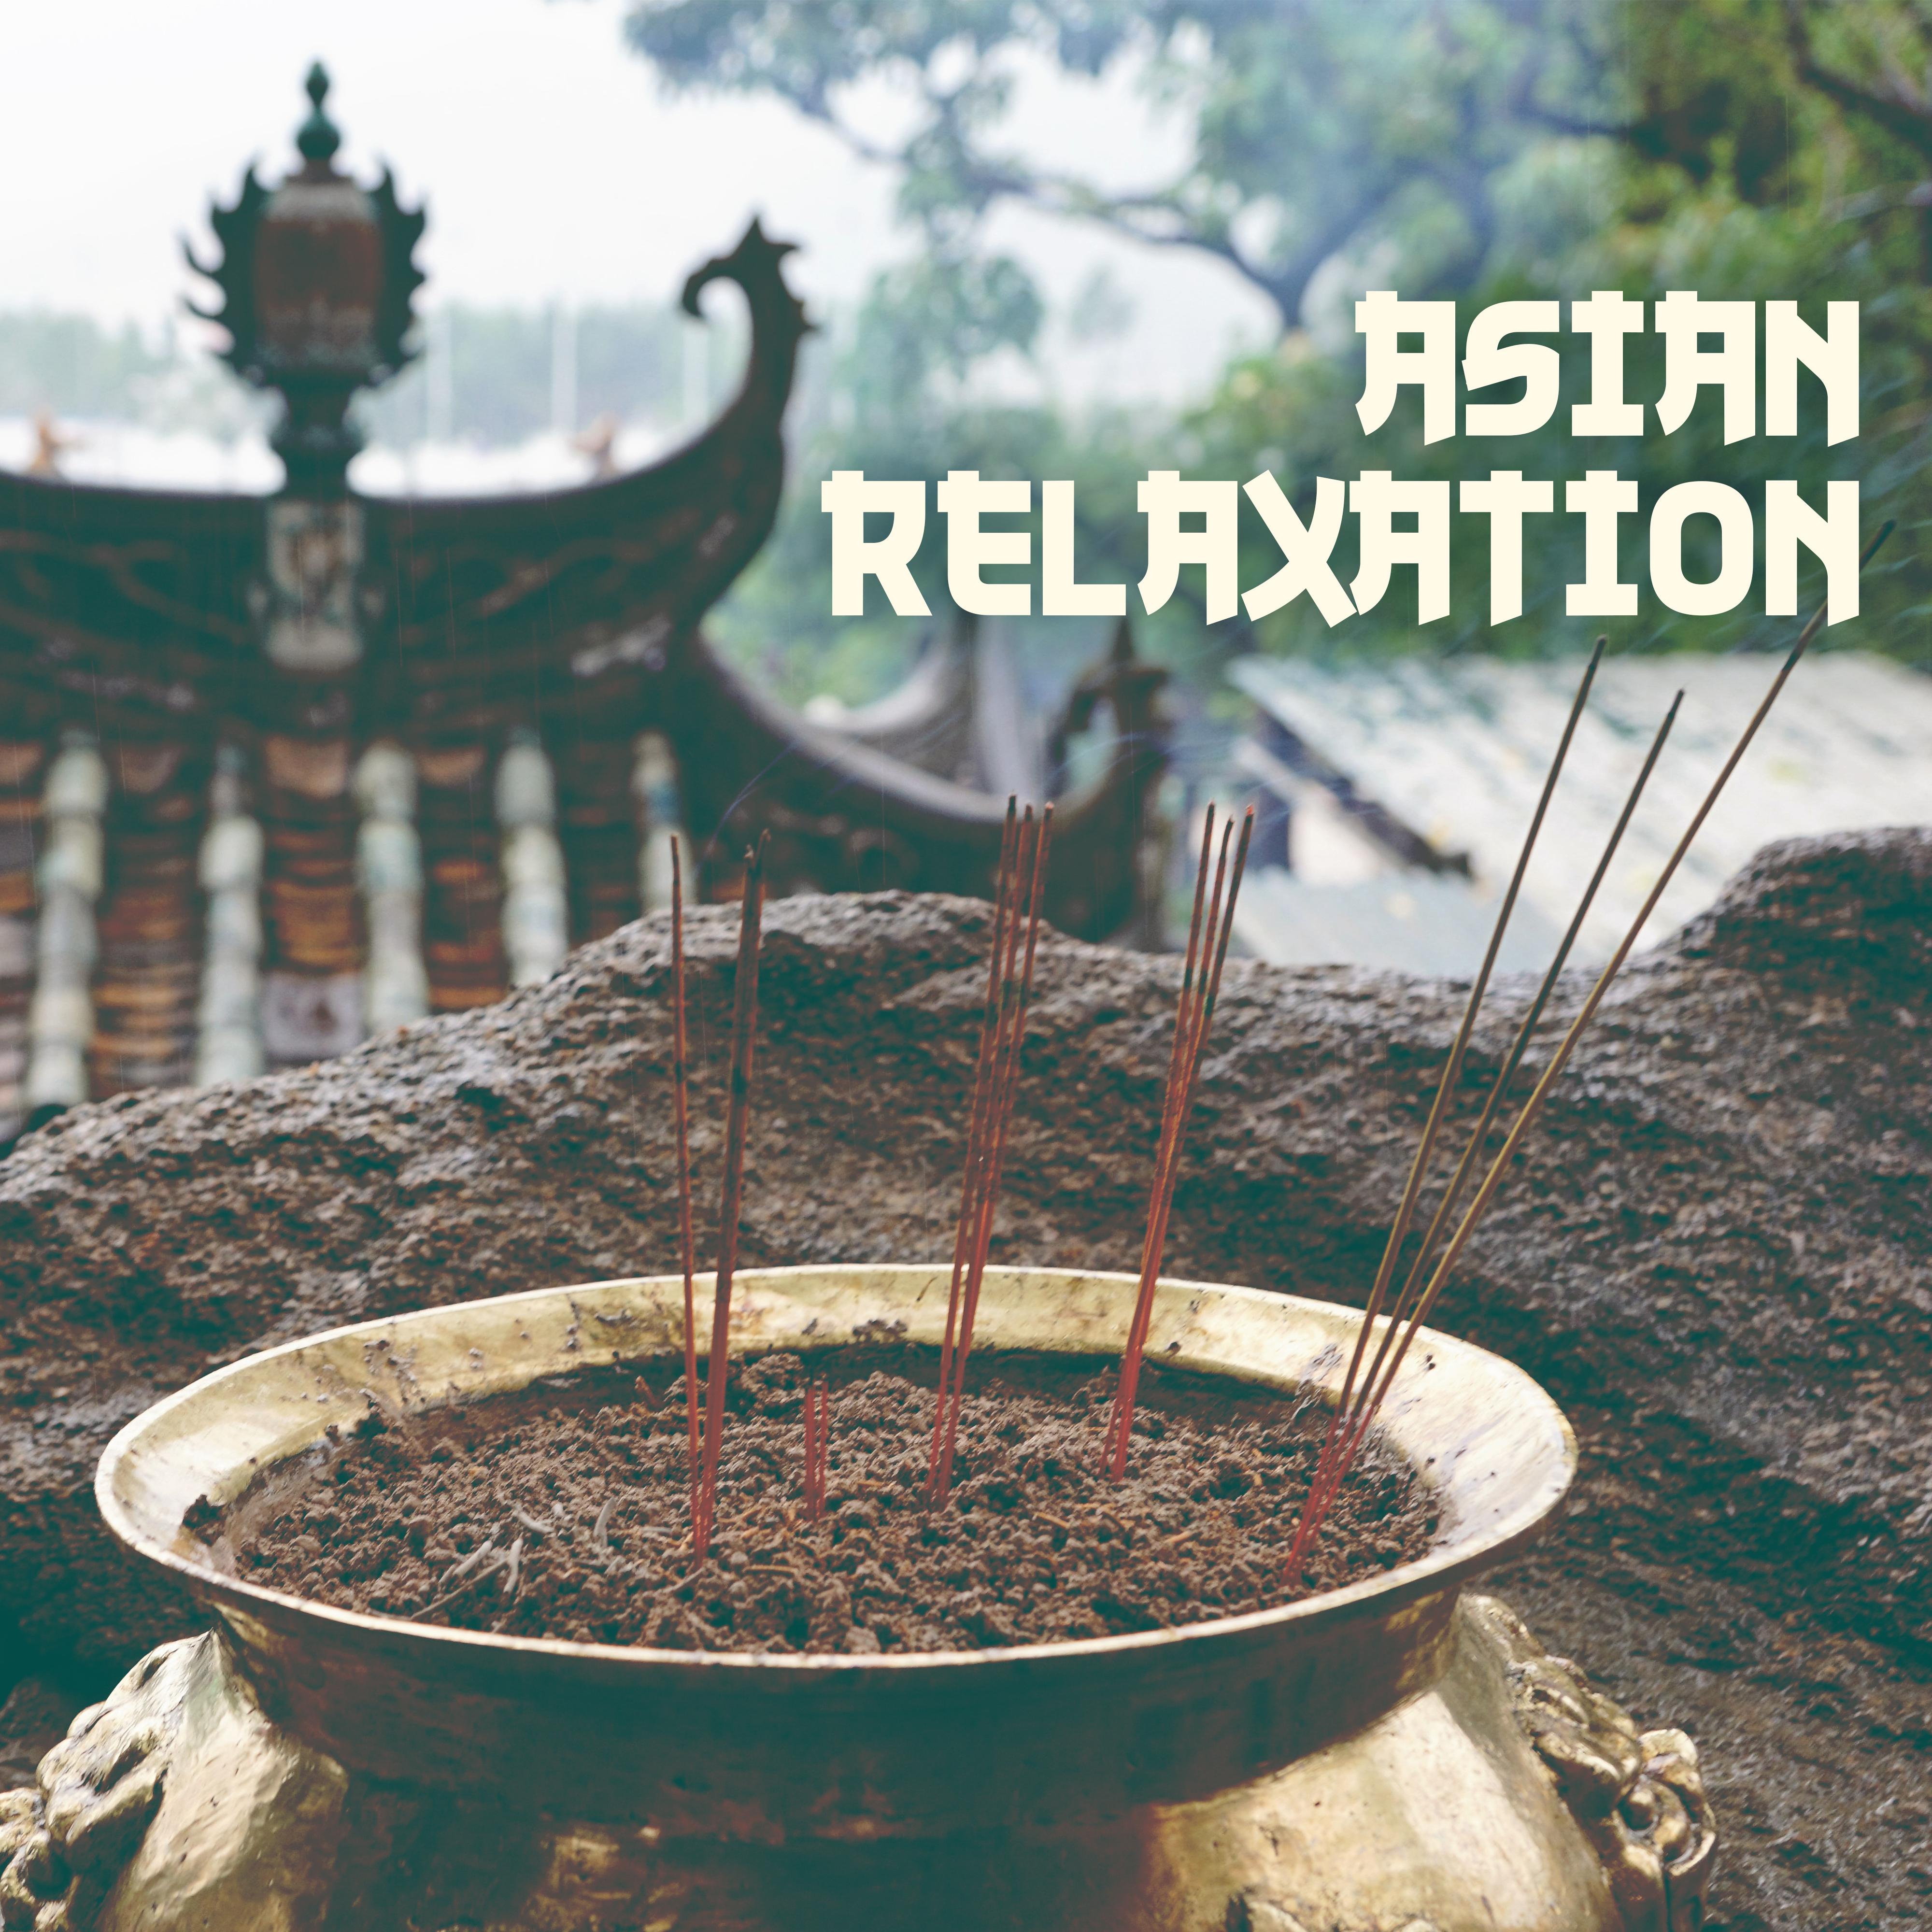 Asian Relaxation